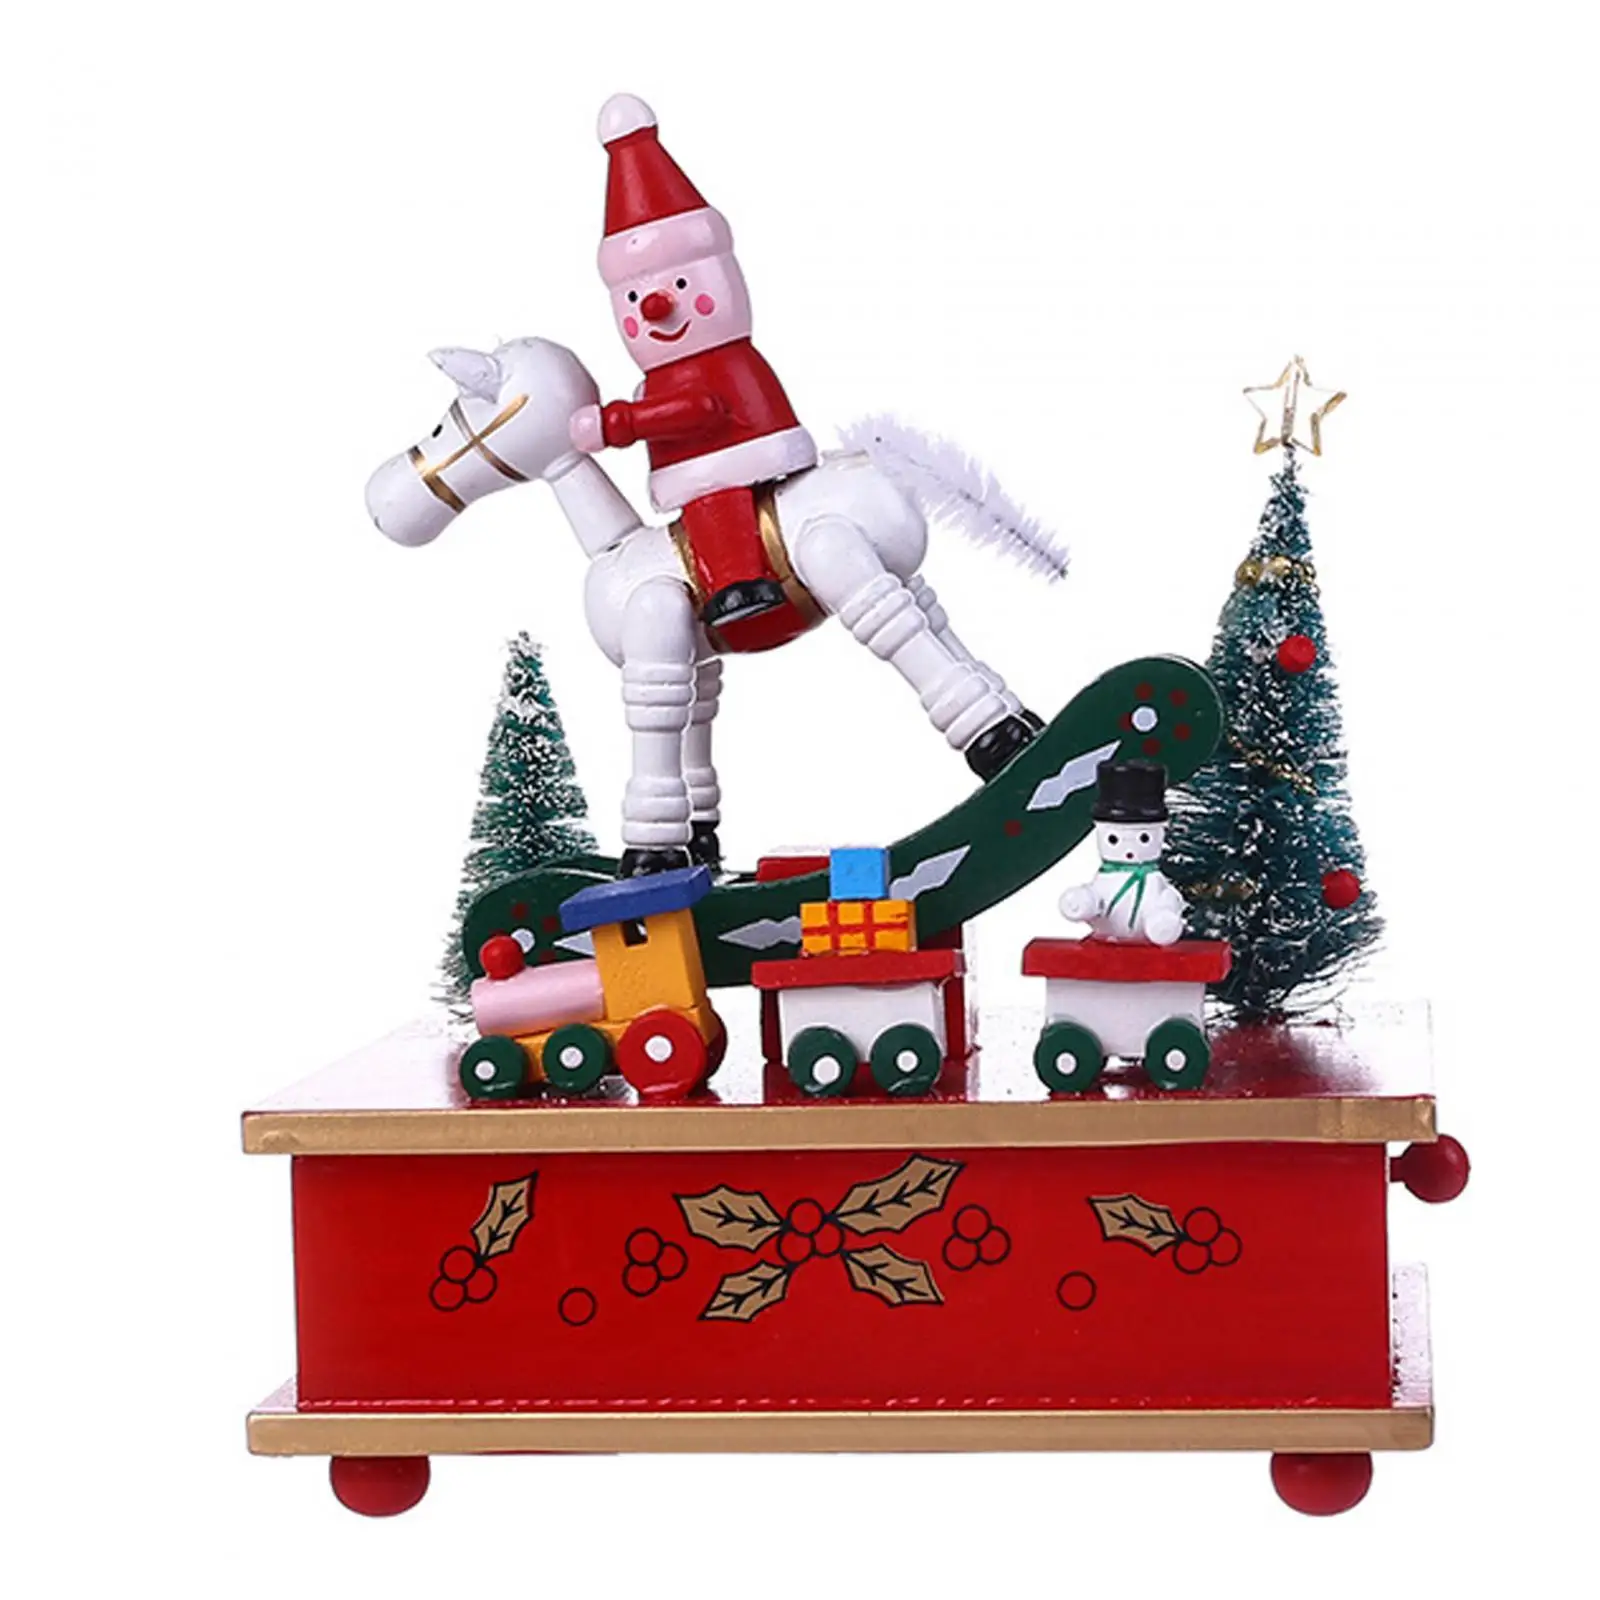 Xmas Music Box Crafts Christmas Statue Home Decoration Accessories Table Centerpiece for Party Holiday Shelf Living Room Office